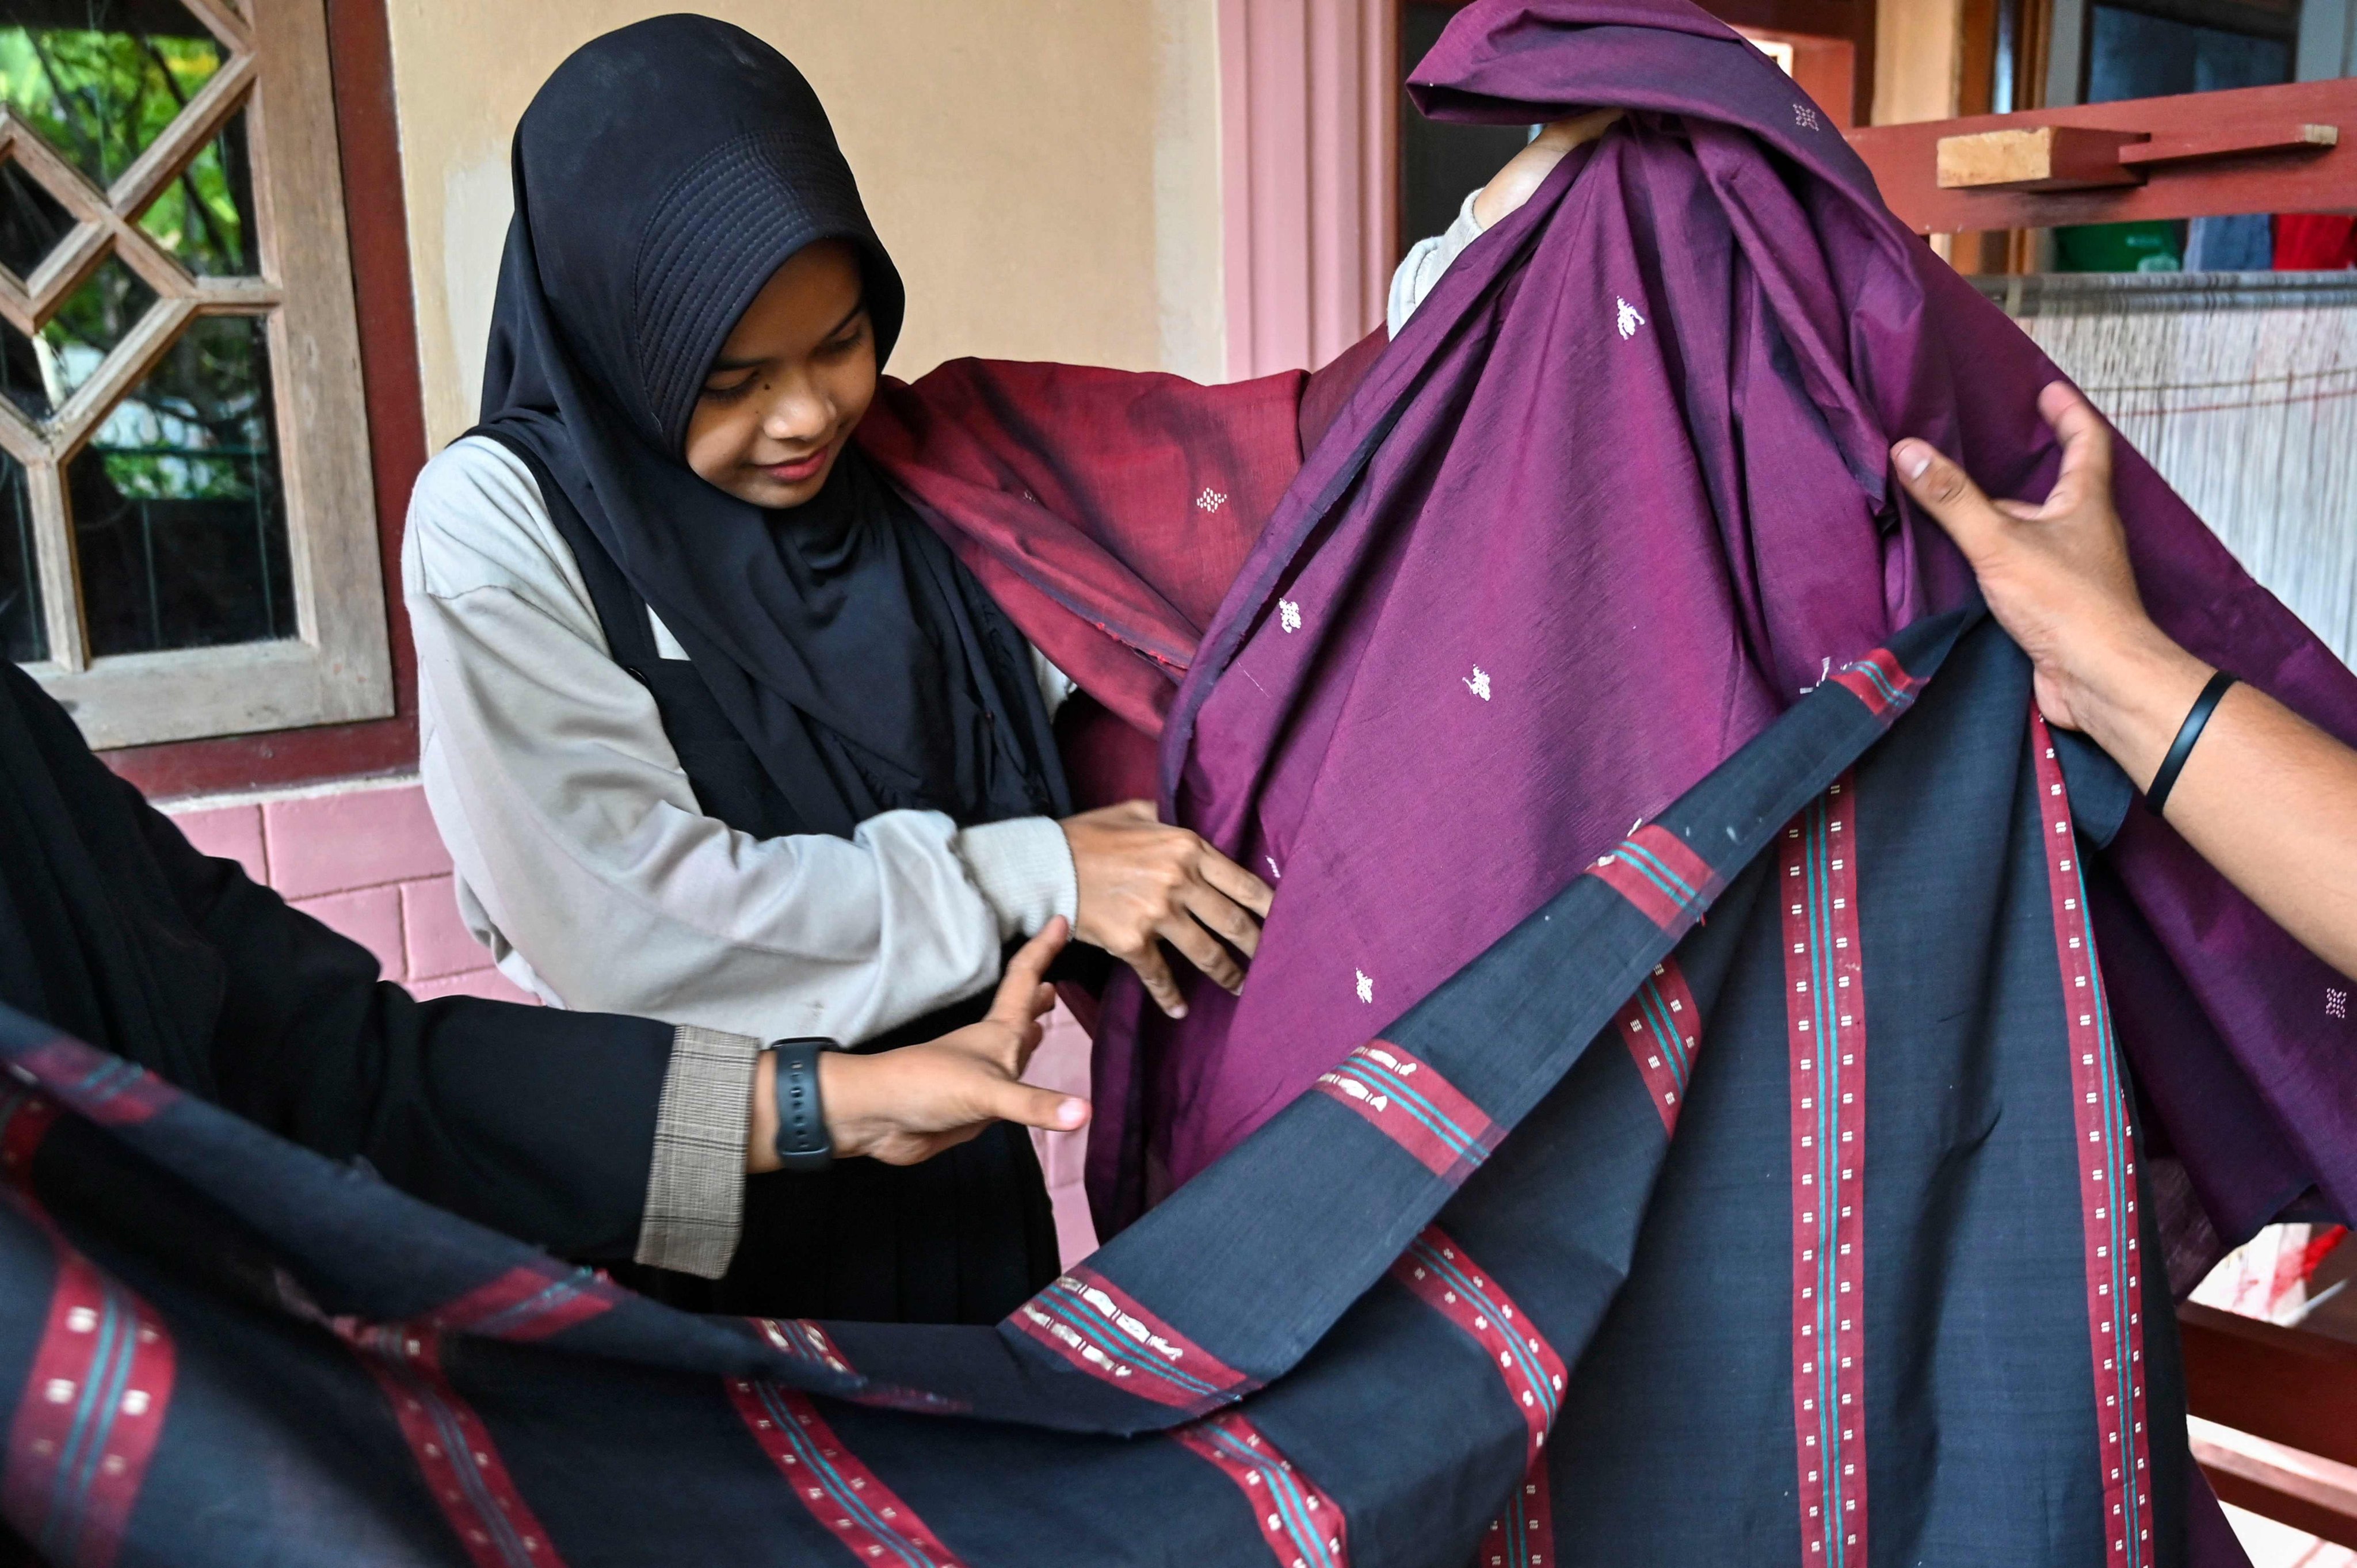 An employee displays traditional textiles in Lhoknga, Aceh province on June 24. The labour-heavy textile sector employs around 3.9 million people in Indonesia. Photo: AFP